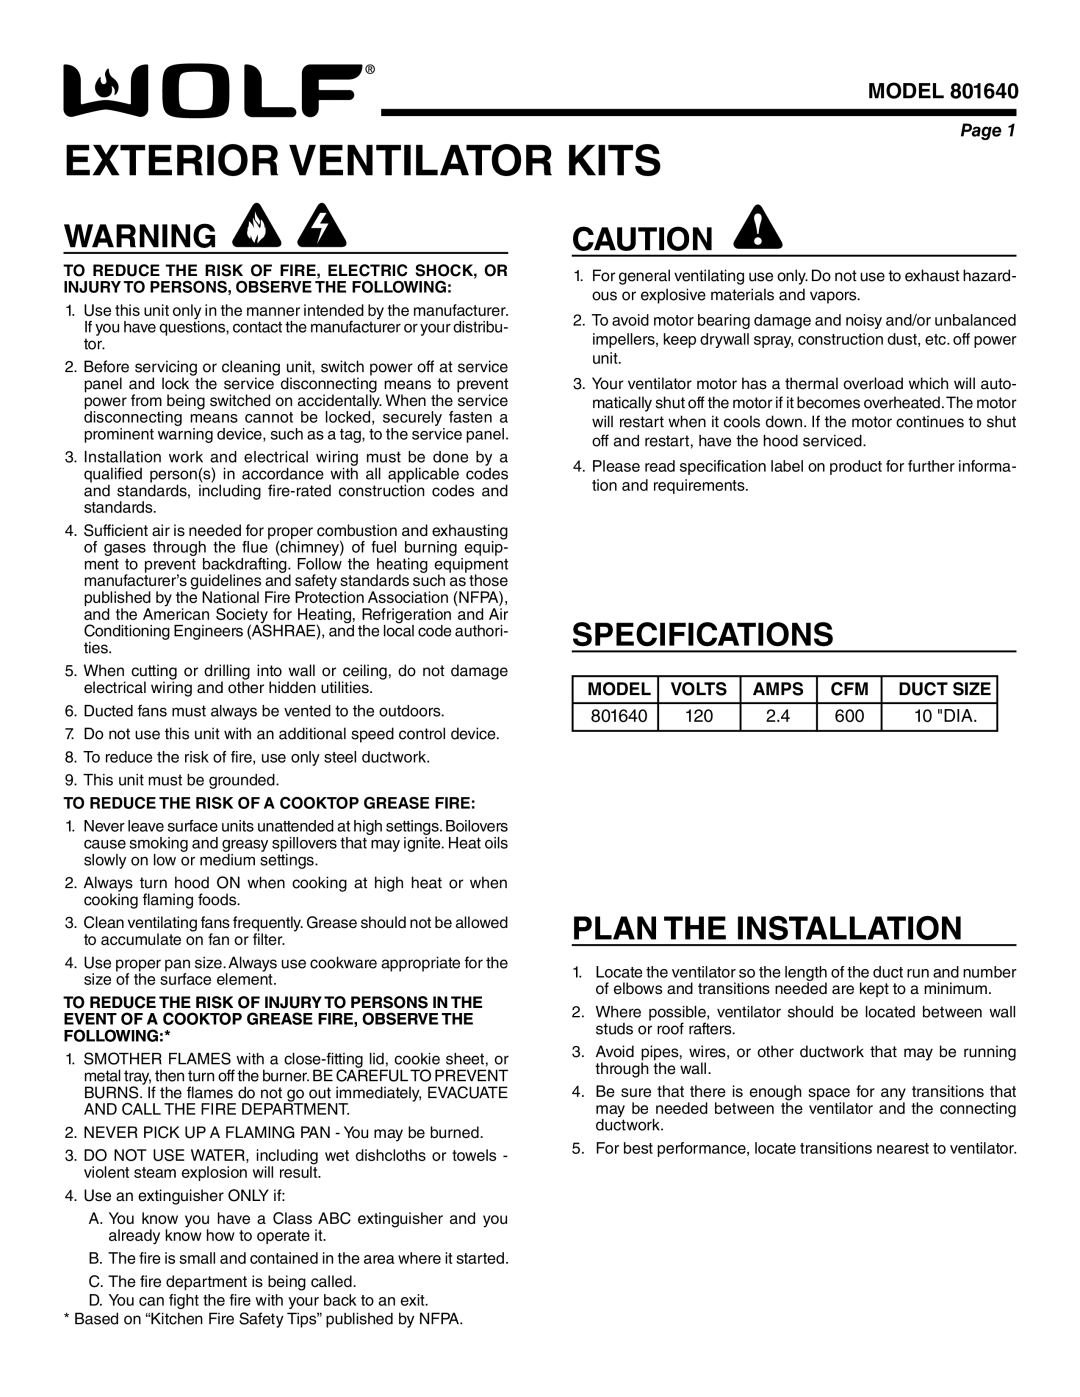 Wolf Appliance Company 801640 specifications Exterior Ventilator Kits, Specifications, Plan The Installation, Model, Page 